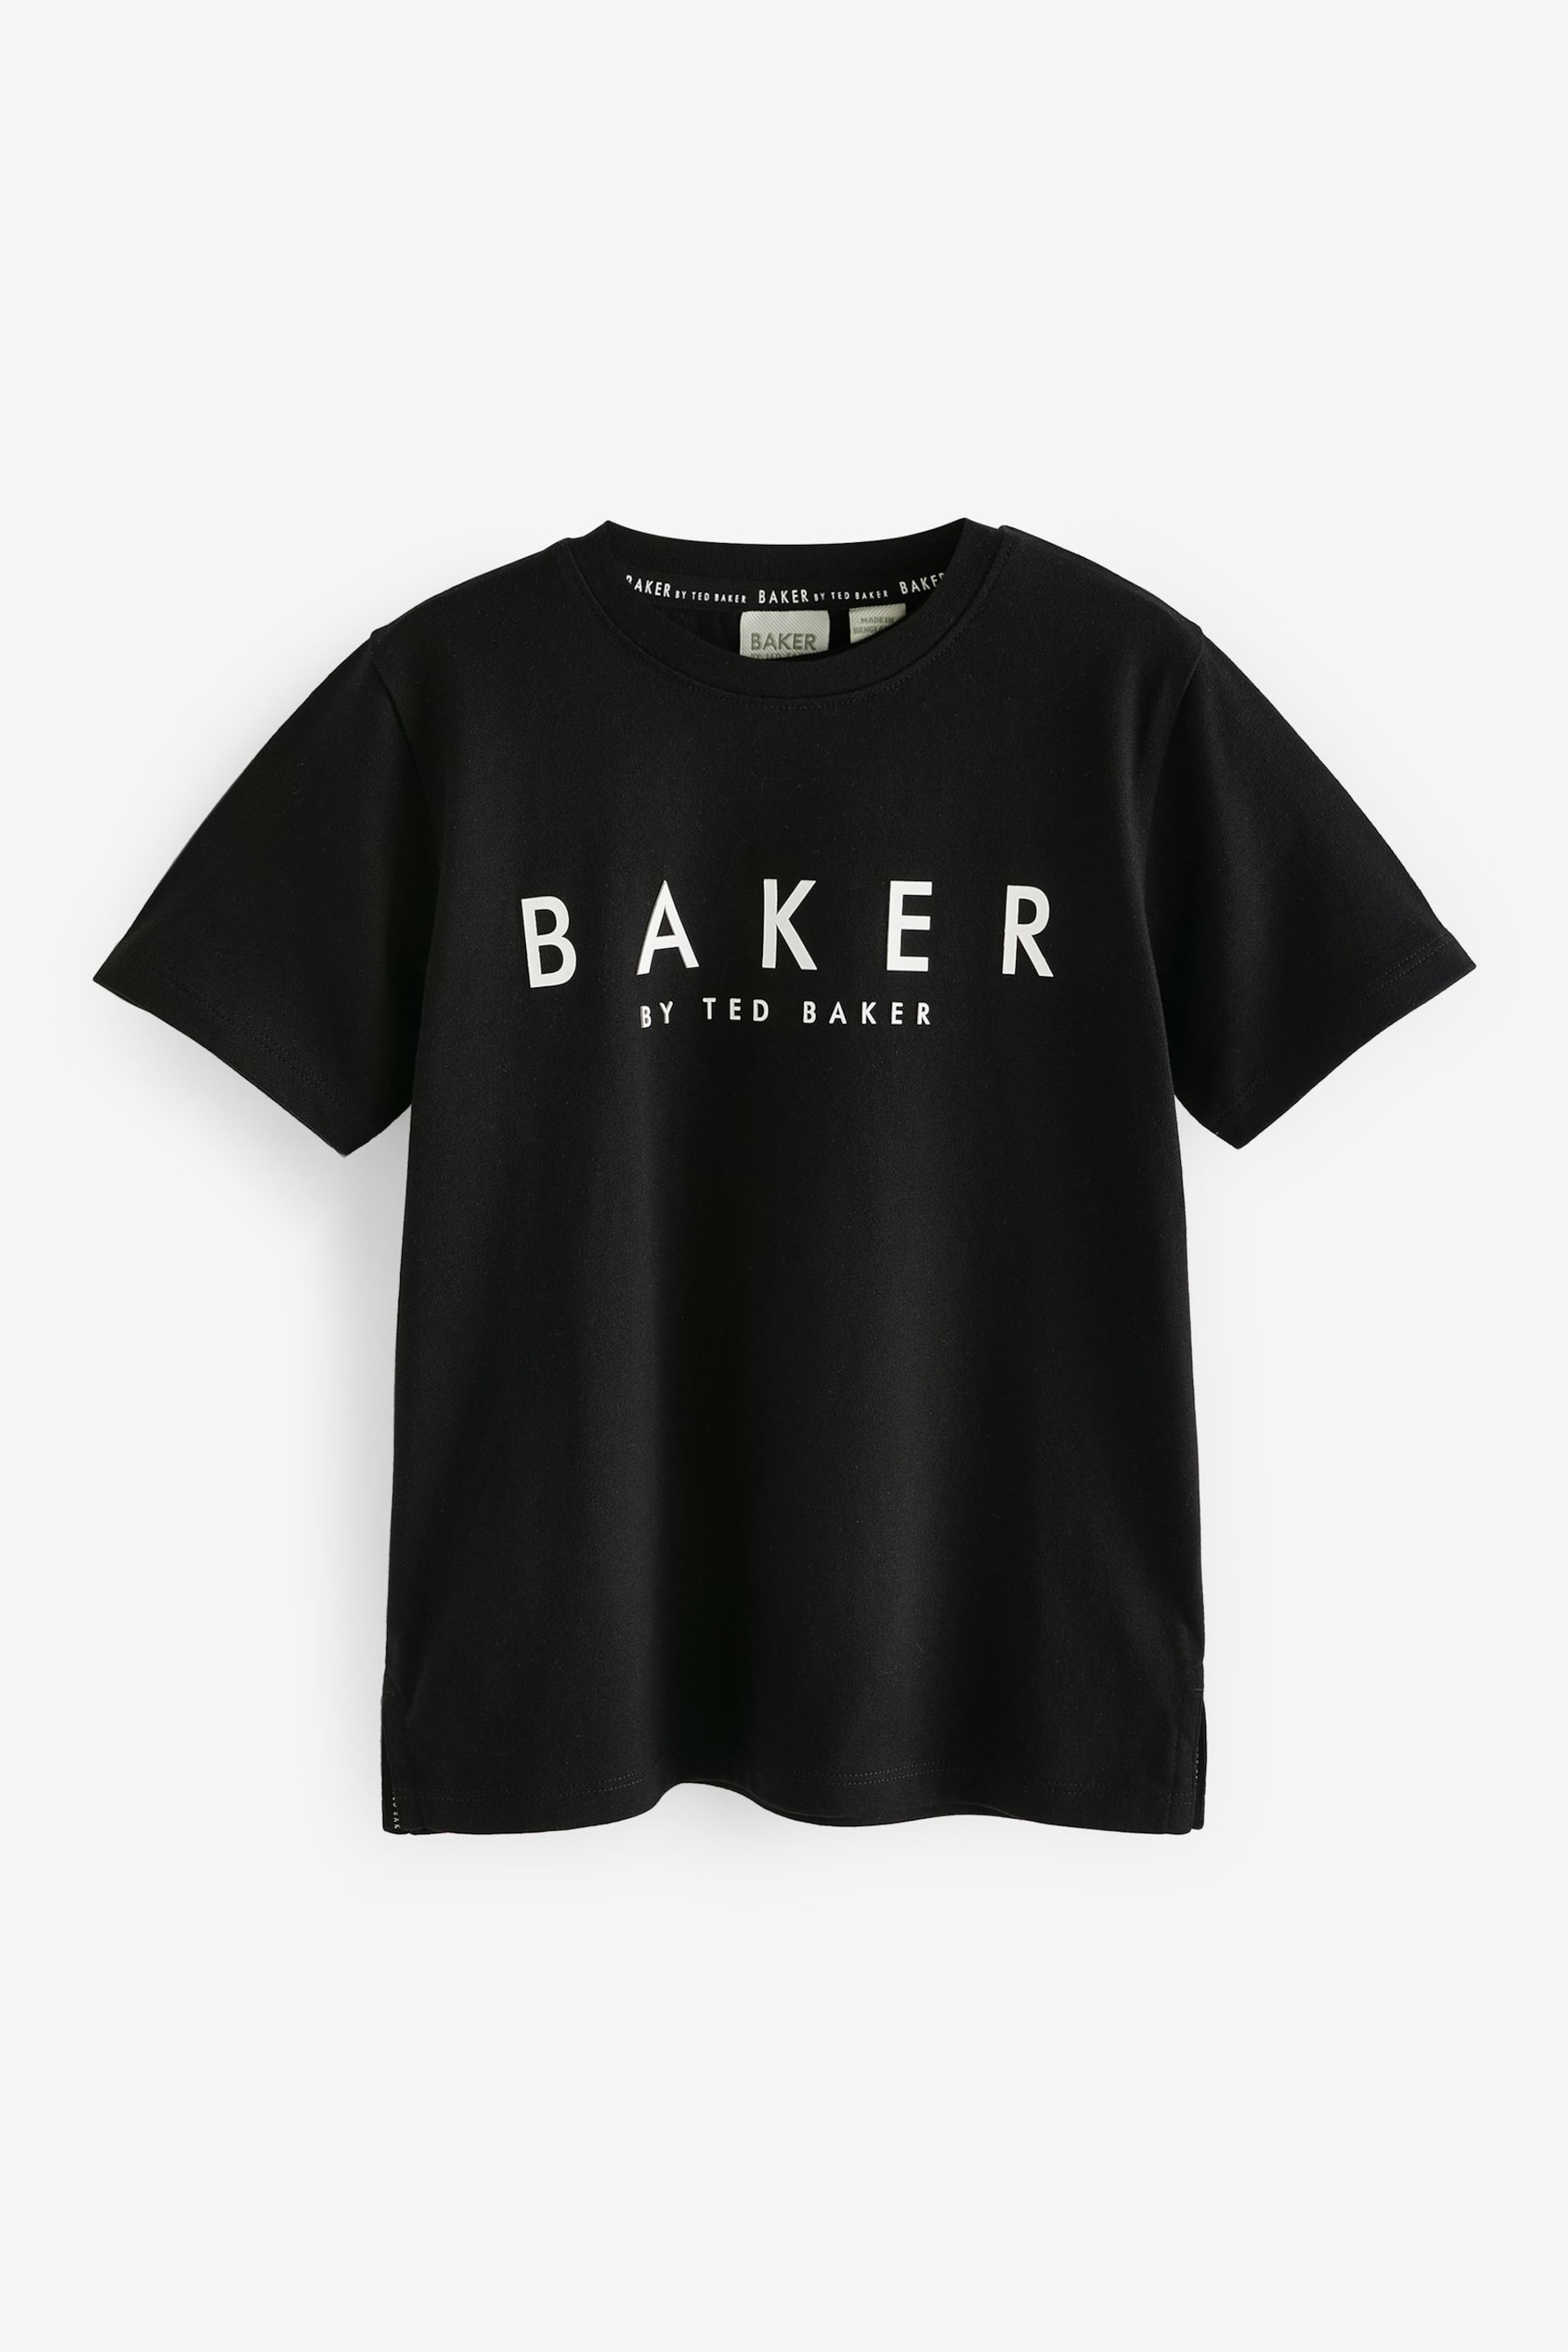 Baker by Ted Baker Graphic Back T-Shirt - Image 6 of 9